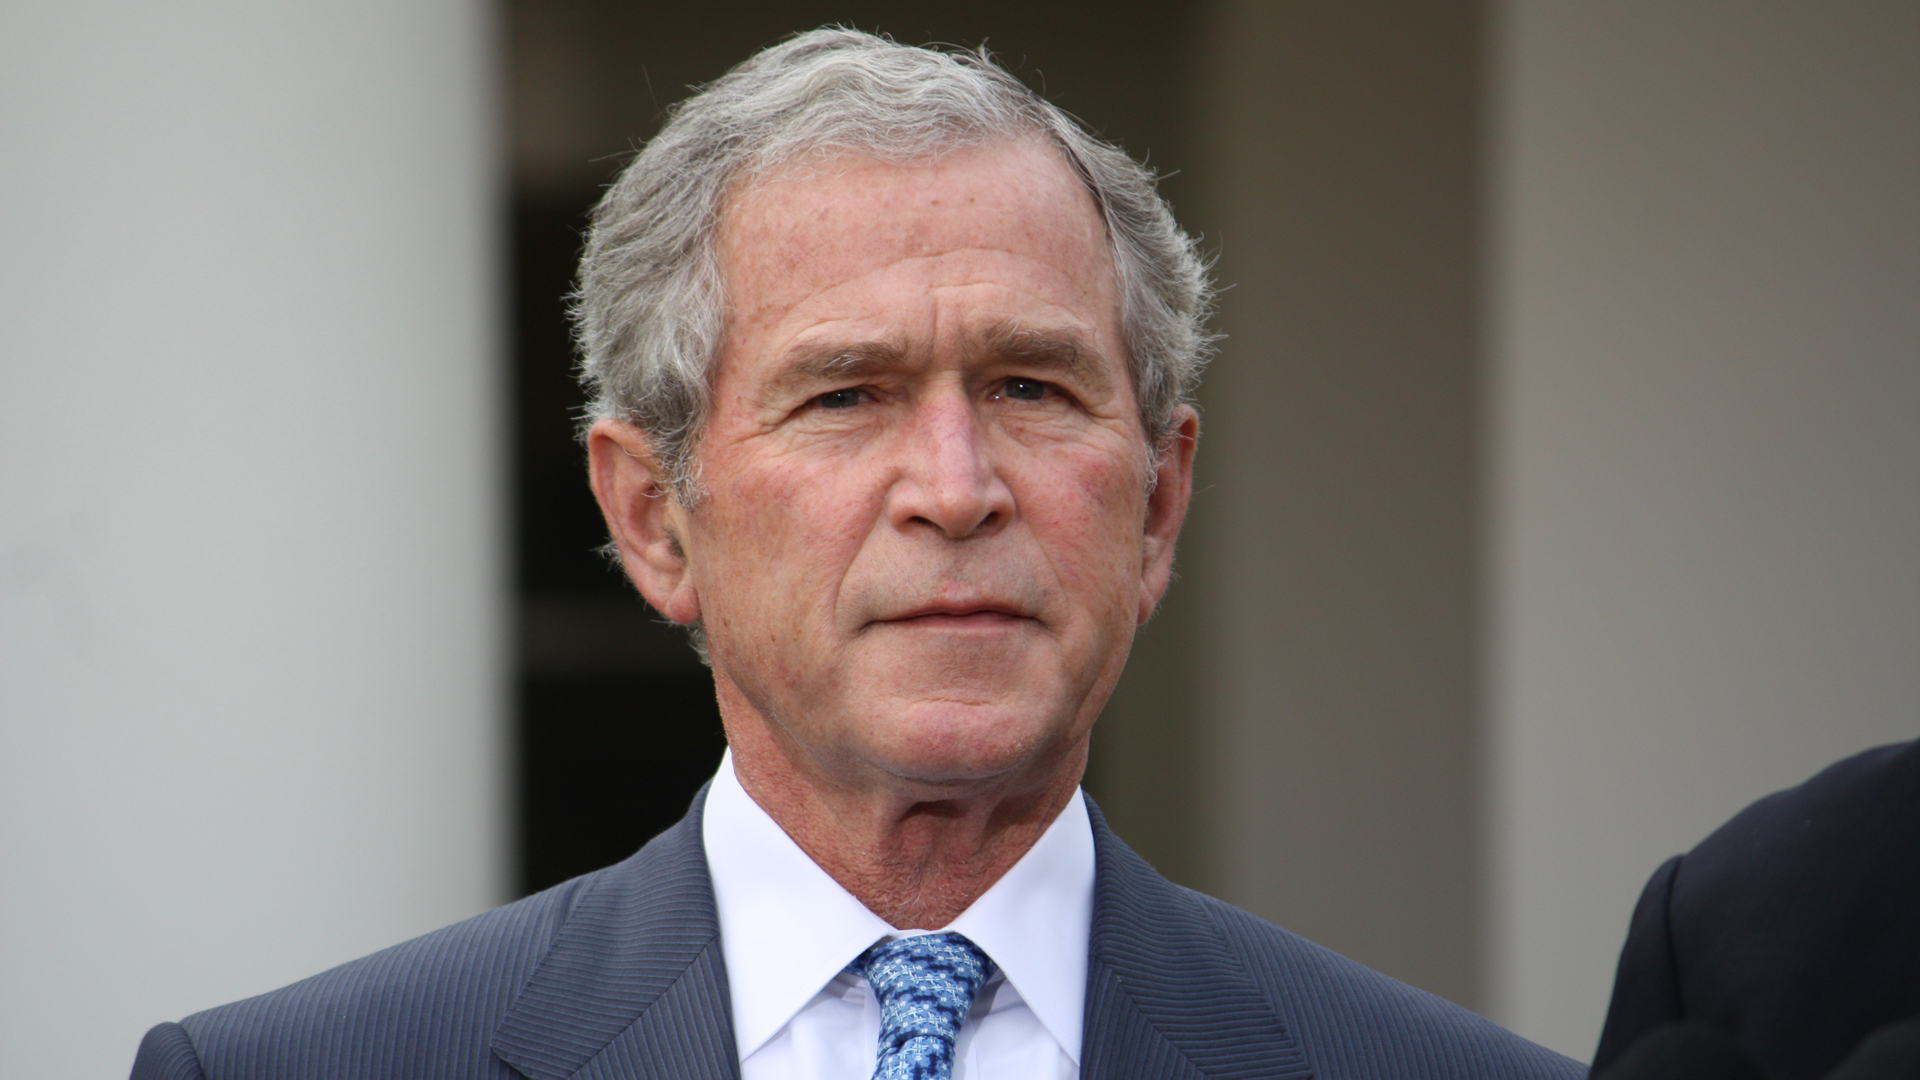 Man Arrested After Allegedly Threatening to Kill George W. Bush